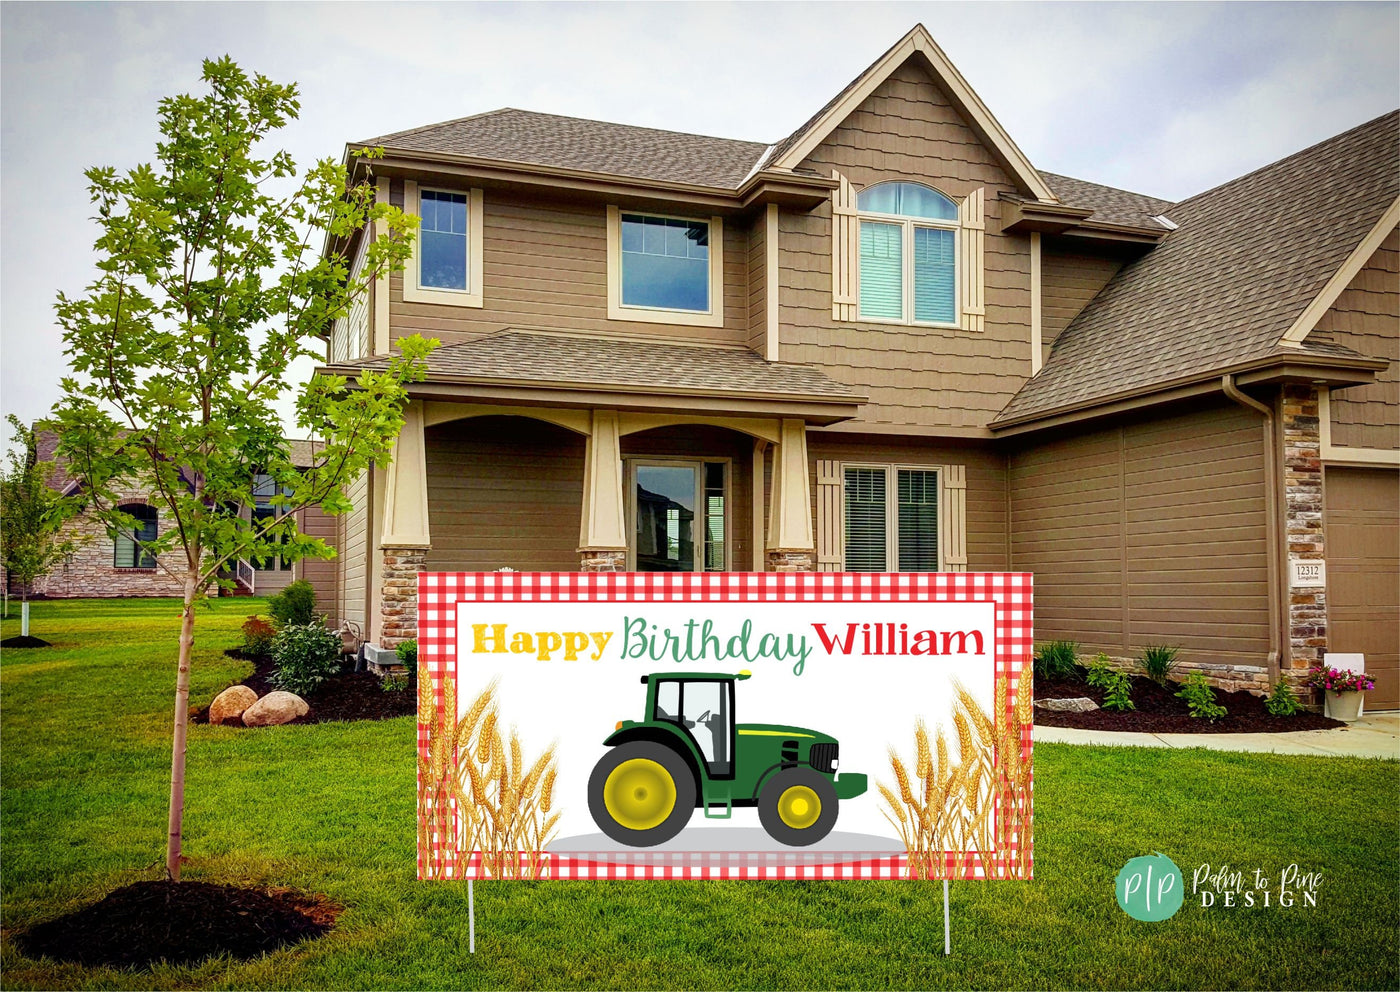 Tractor Birthday Banner, Personalized Tractor Party Decor, Farm Birthday, Tractor Party Birthday Decor, Tractor Banner, Custom Farm Banner